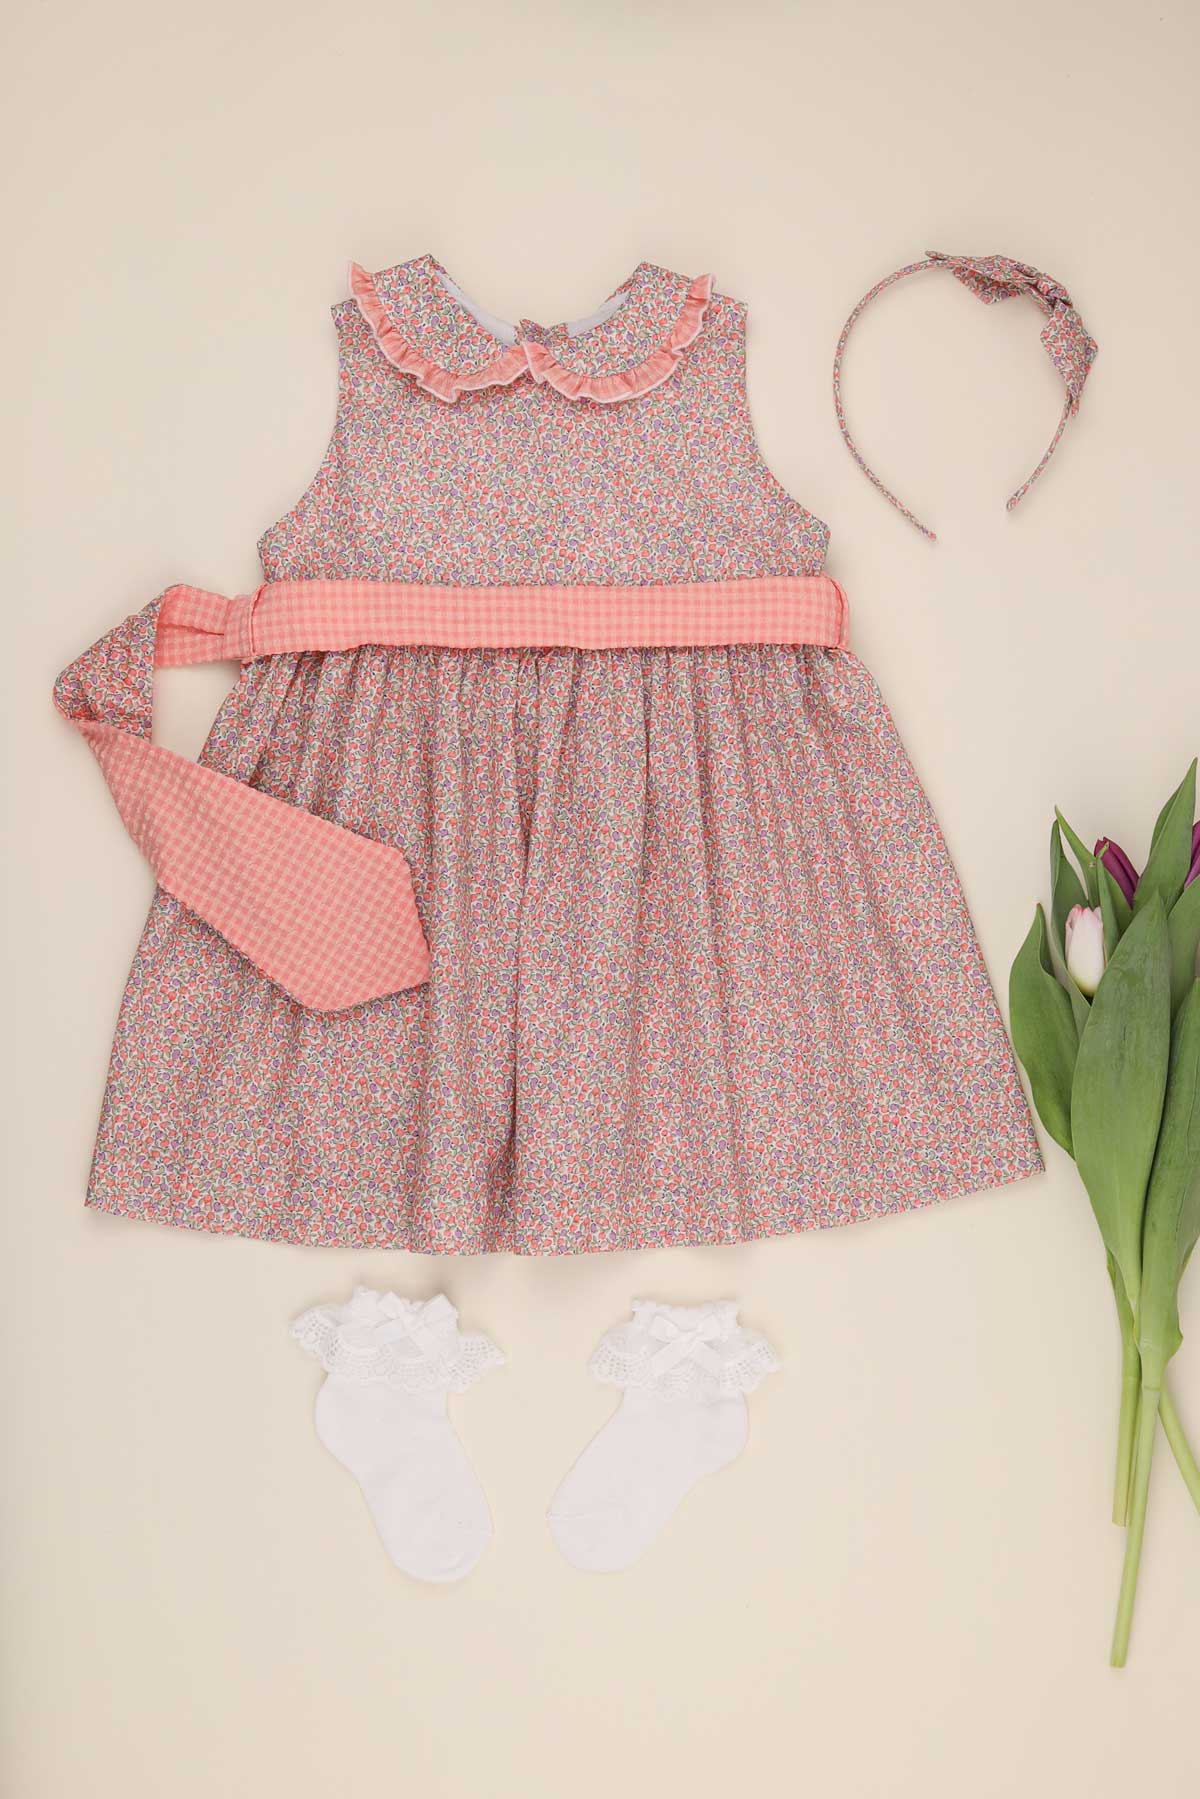 ditsty floral girls dress with headband